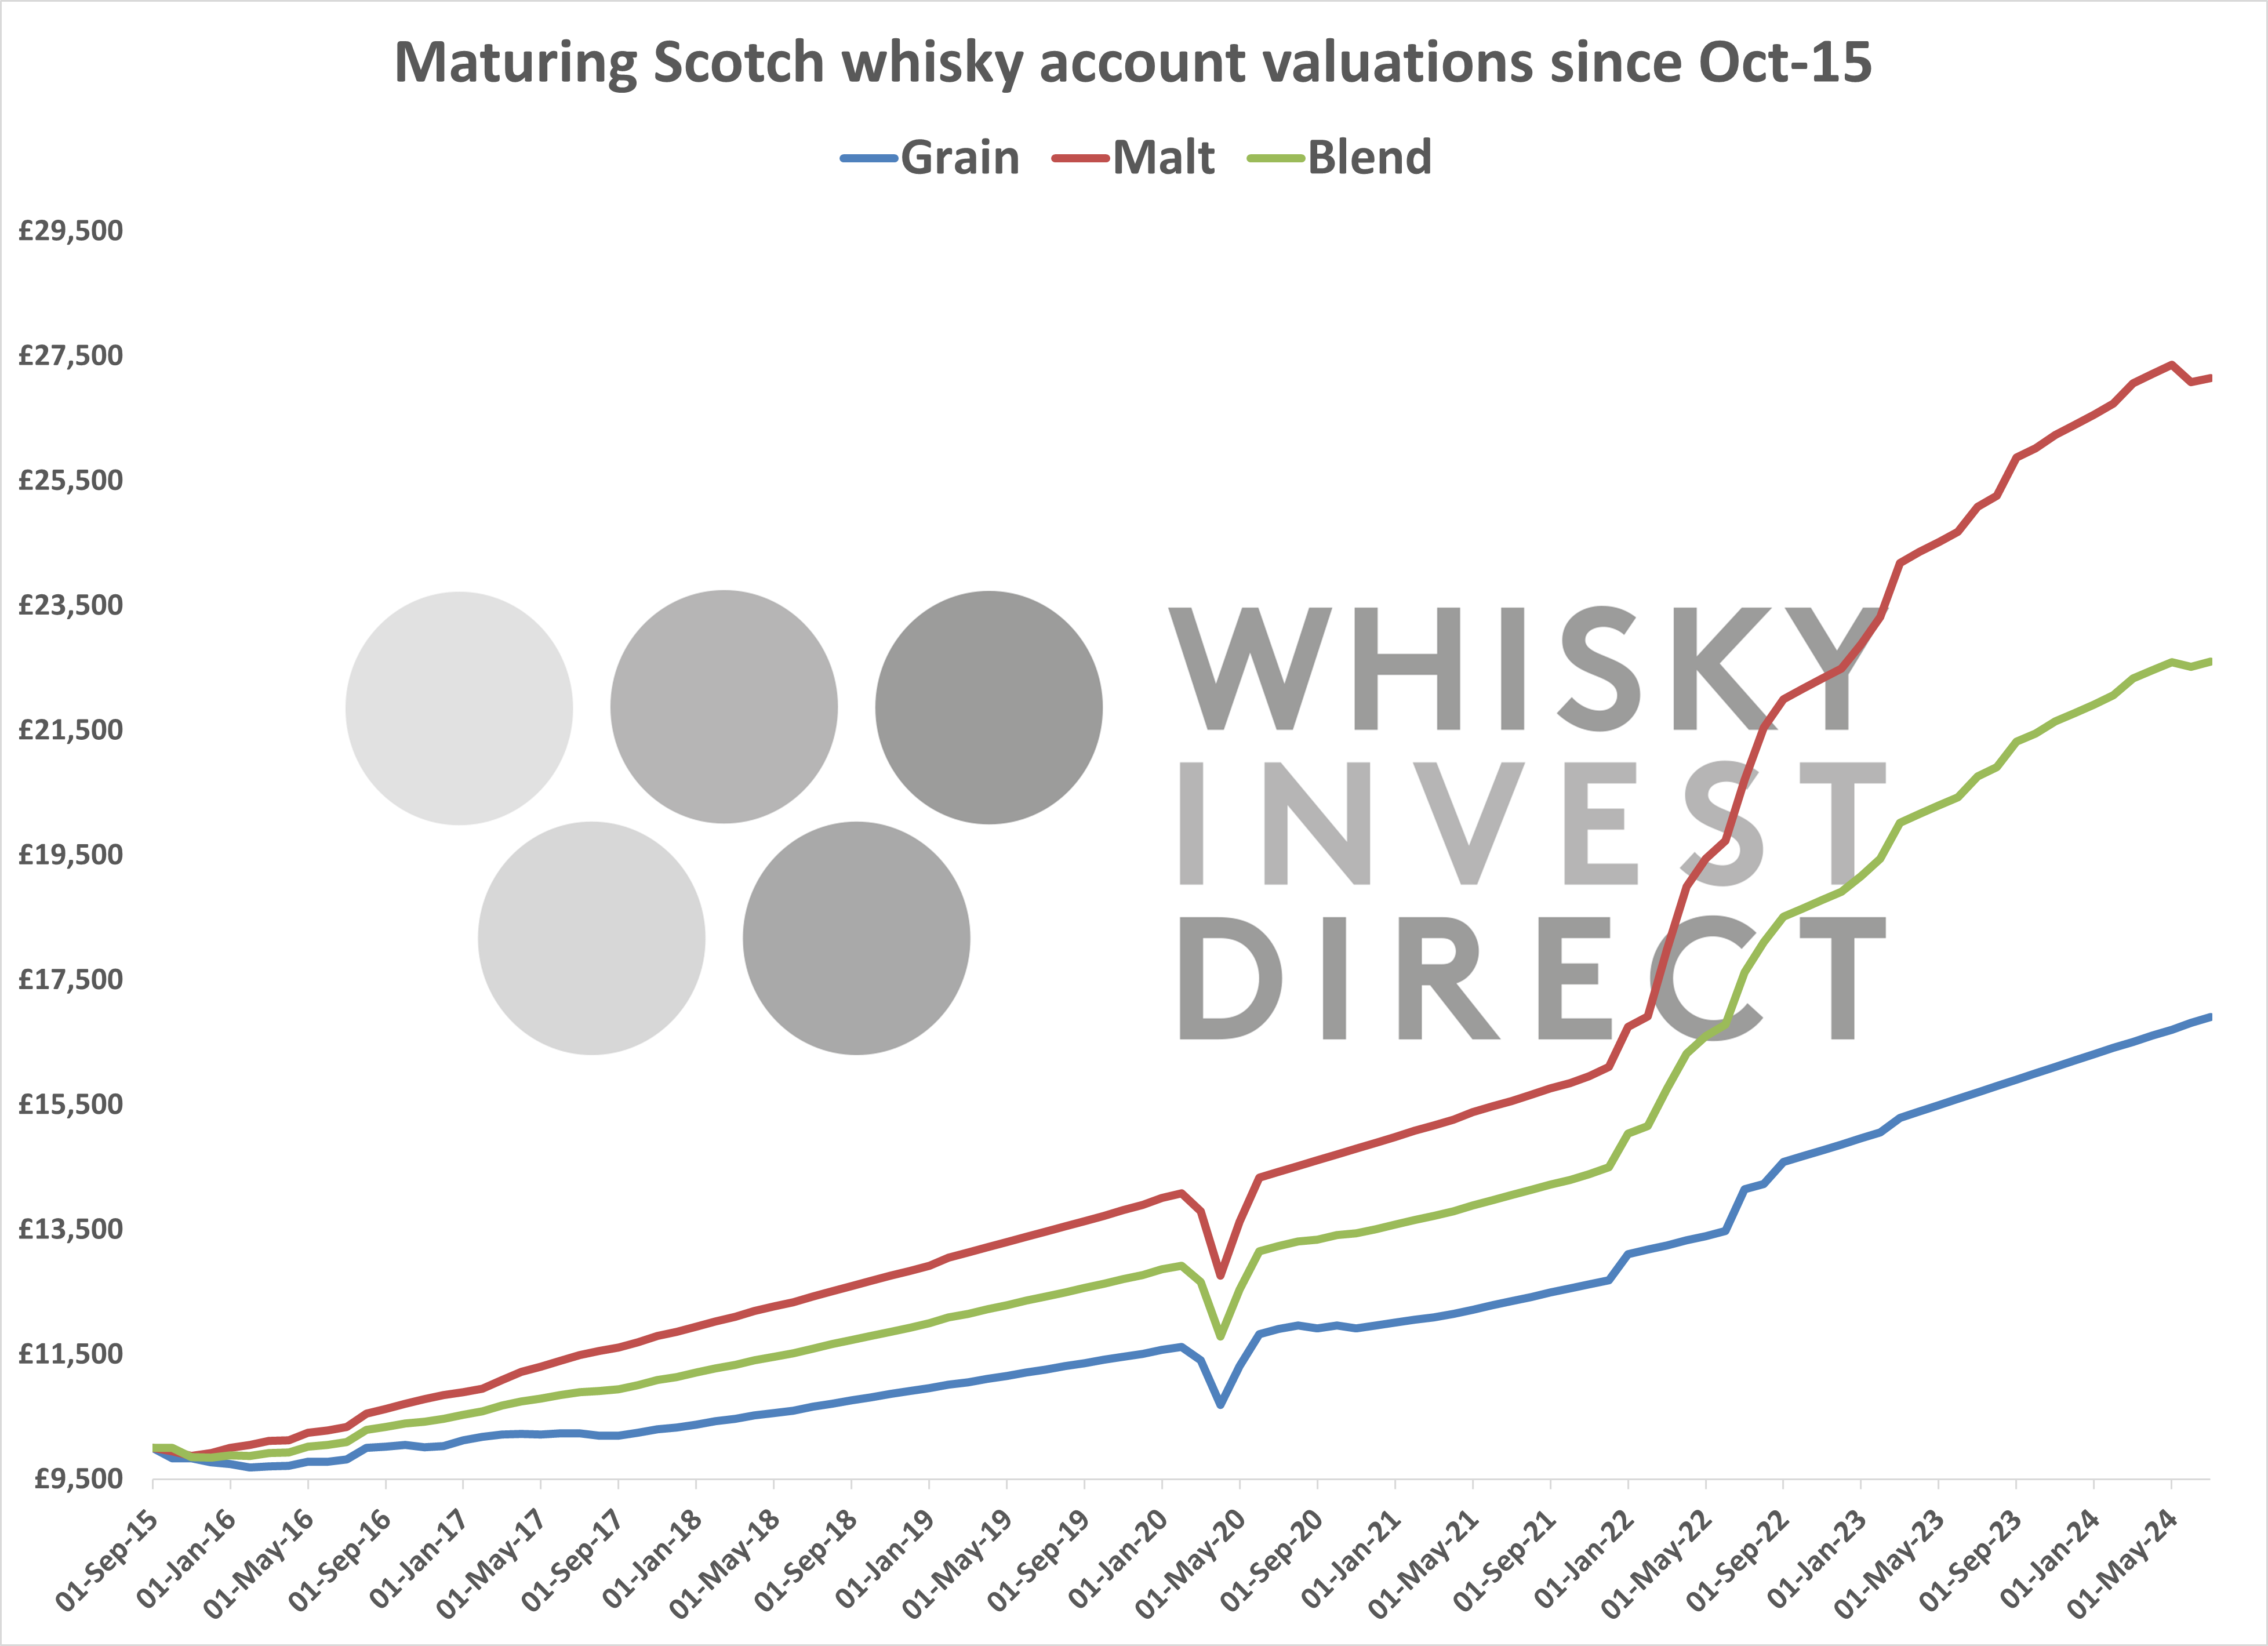 Maturing Scotch whisky account valuations since October 2015